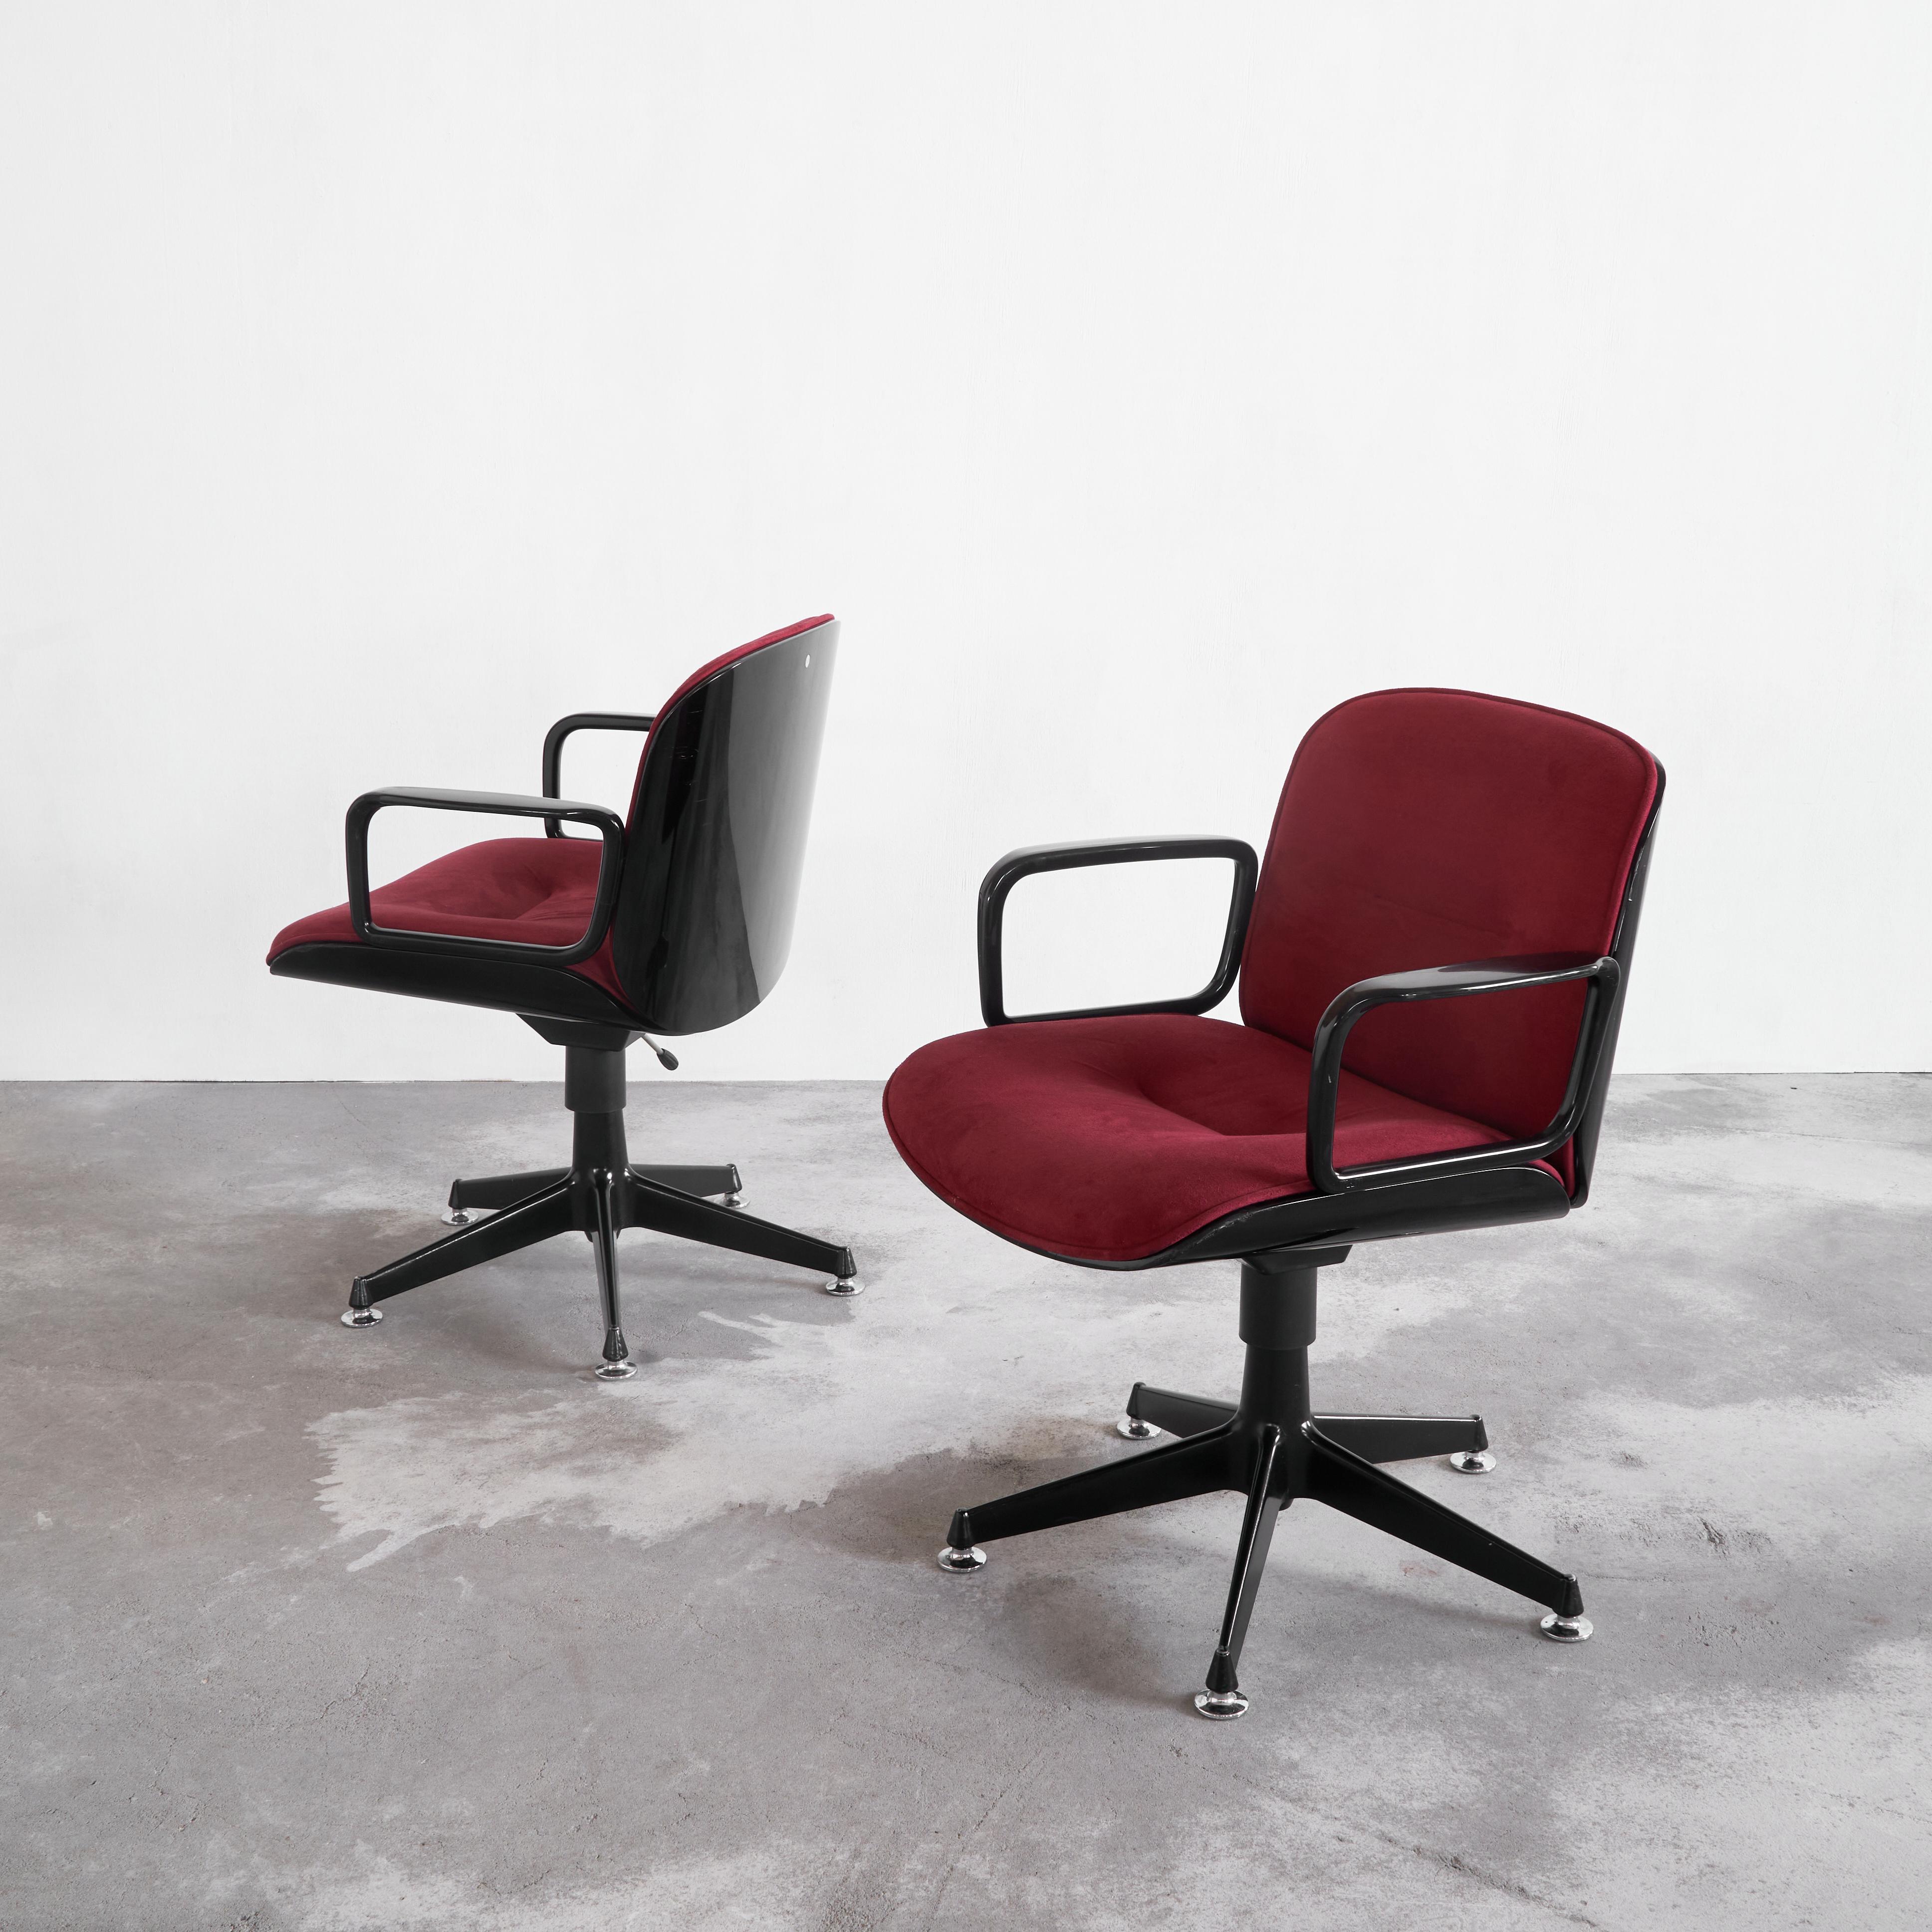 A rare set of two Ico Parisi executive swivel chairs in a striking color combination of black lacquered wood and red velvet. MIM Roma, Italy.

This particular set of chairs began their lives in the boardroom of L'Oréal in Brussels somewhere in the